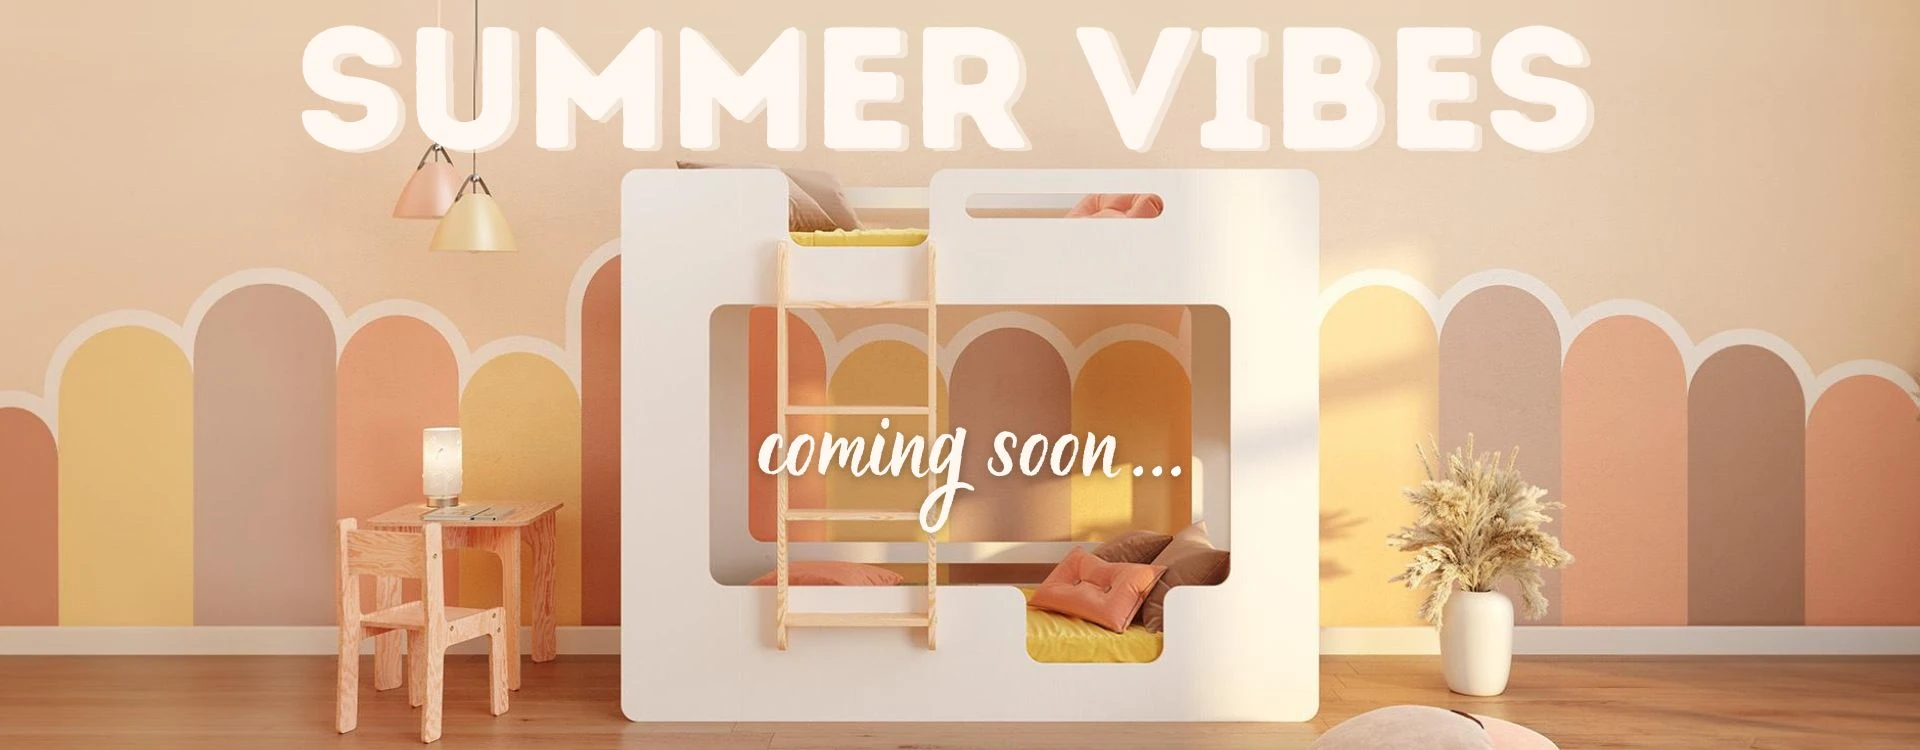 summer vibes - coming soon